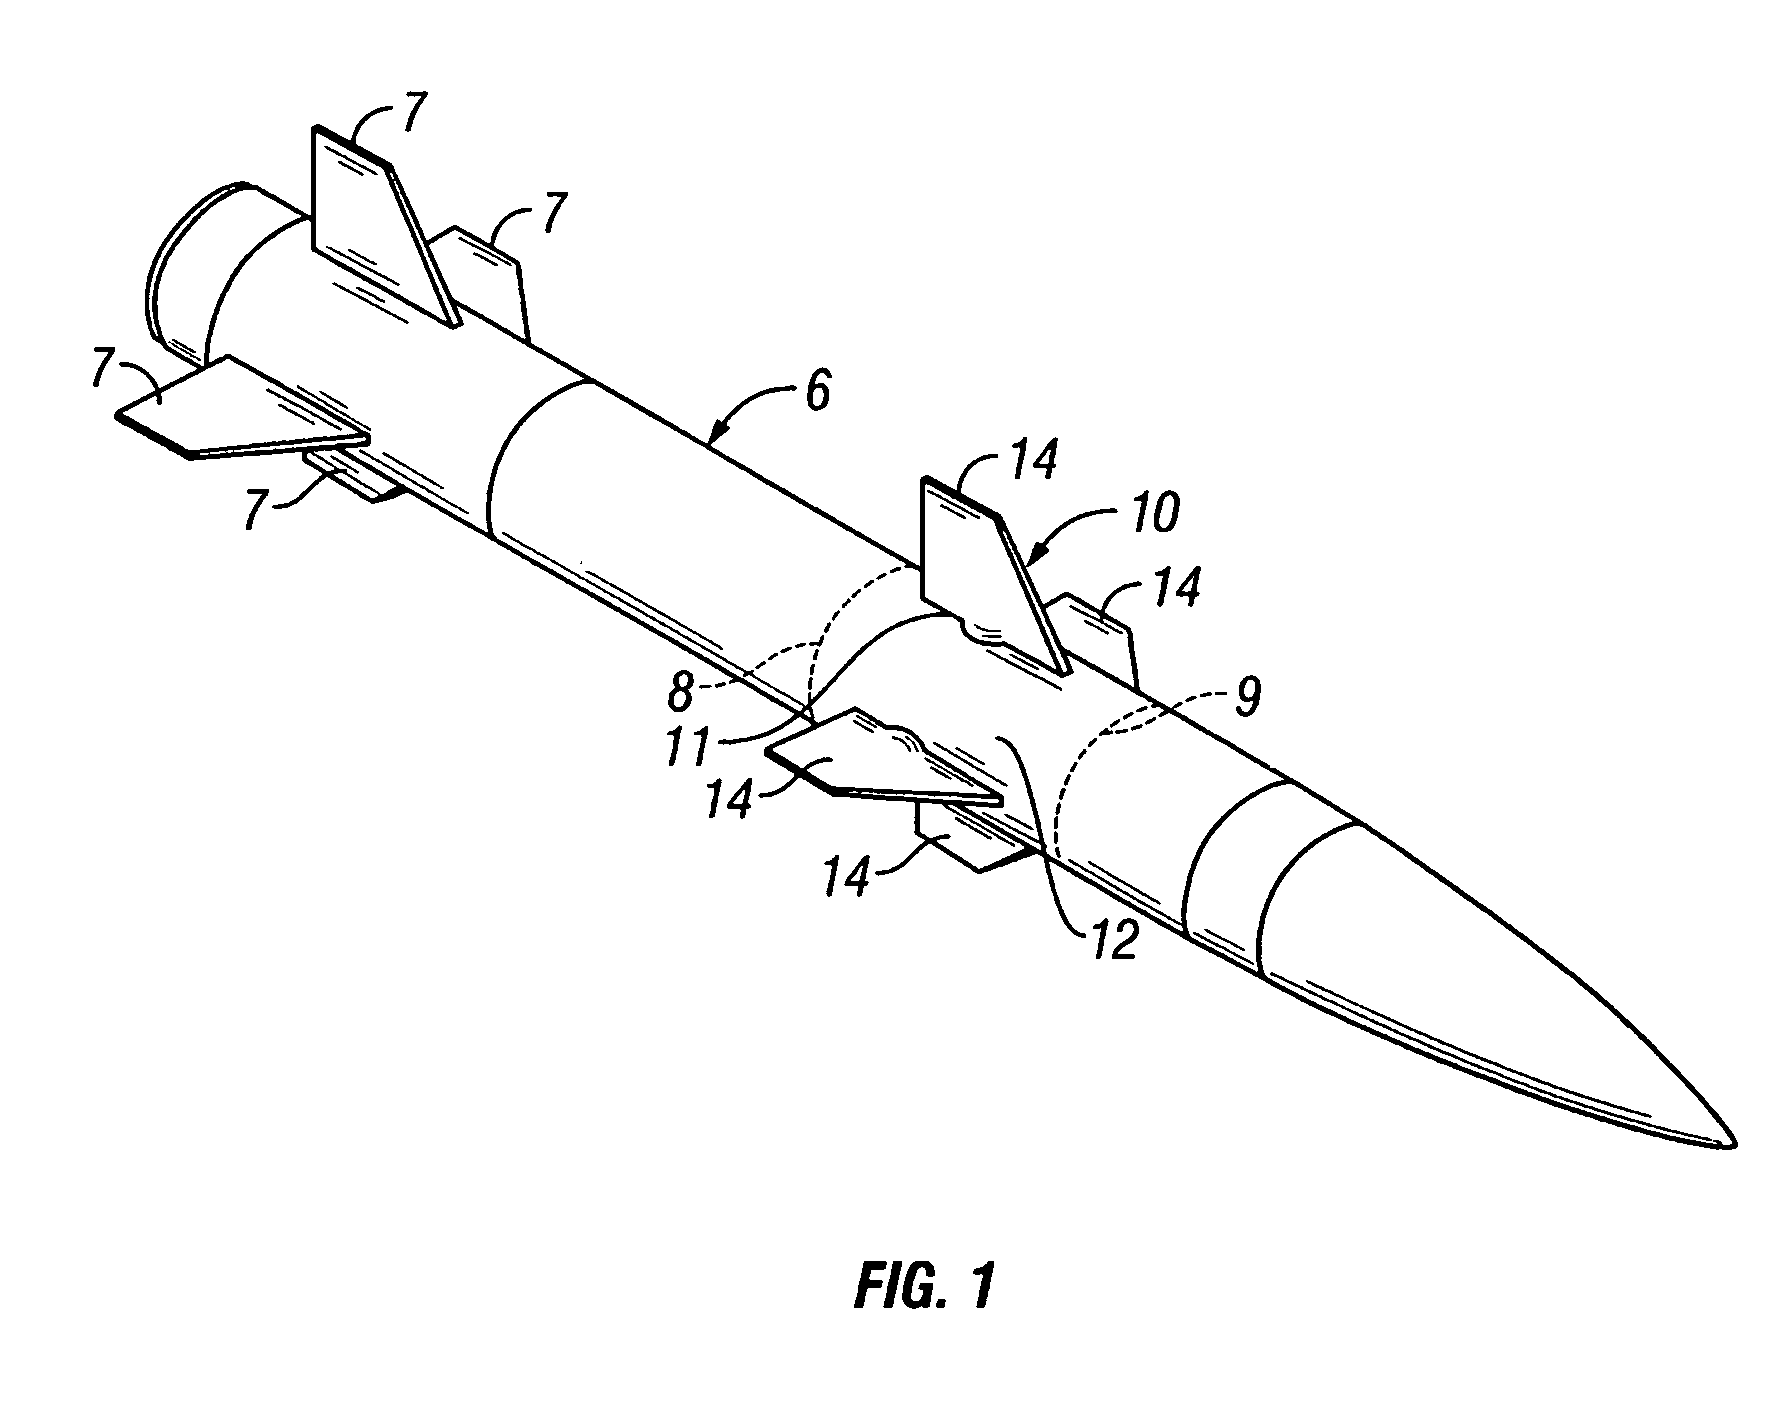 Cover ejection and fin deployment system for a gun-launched projectile